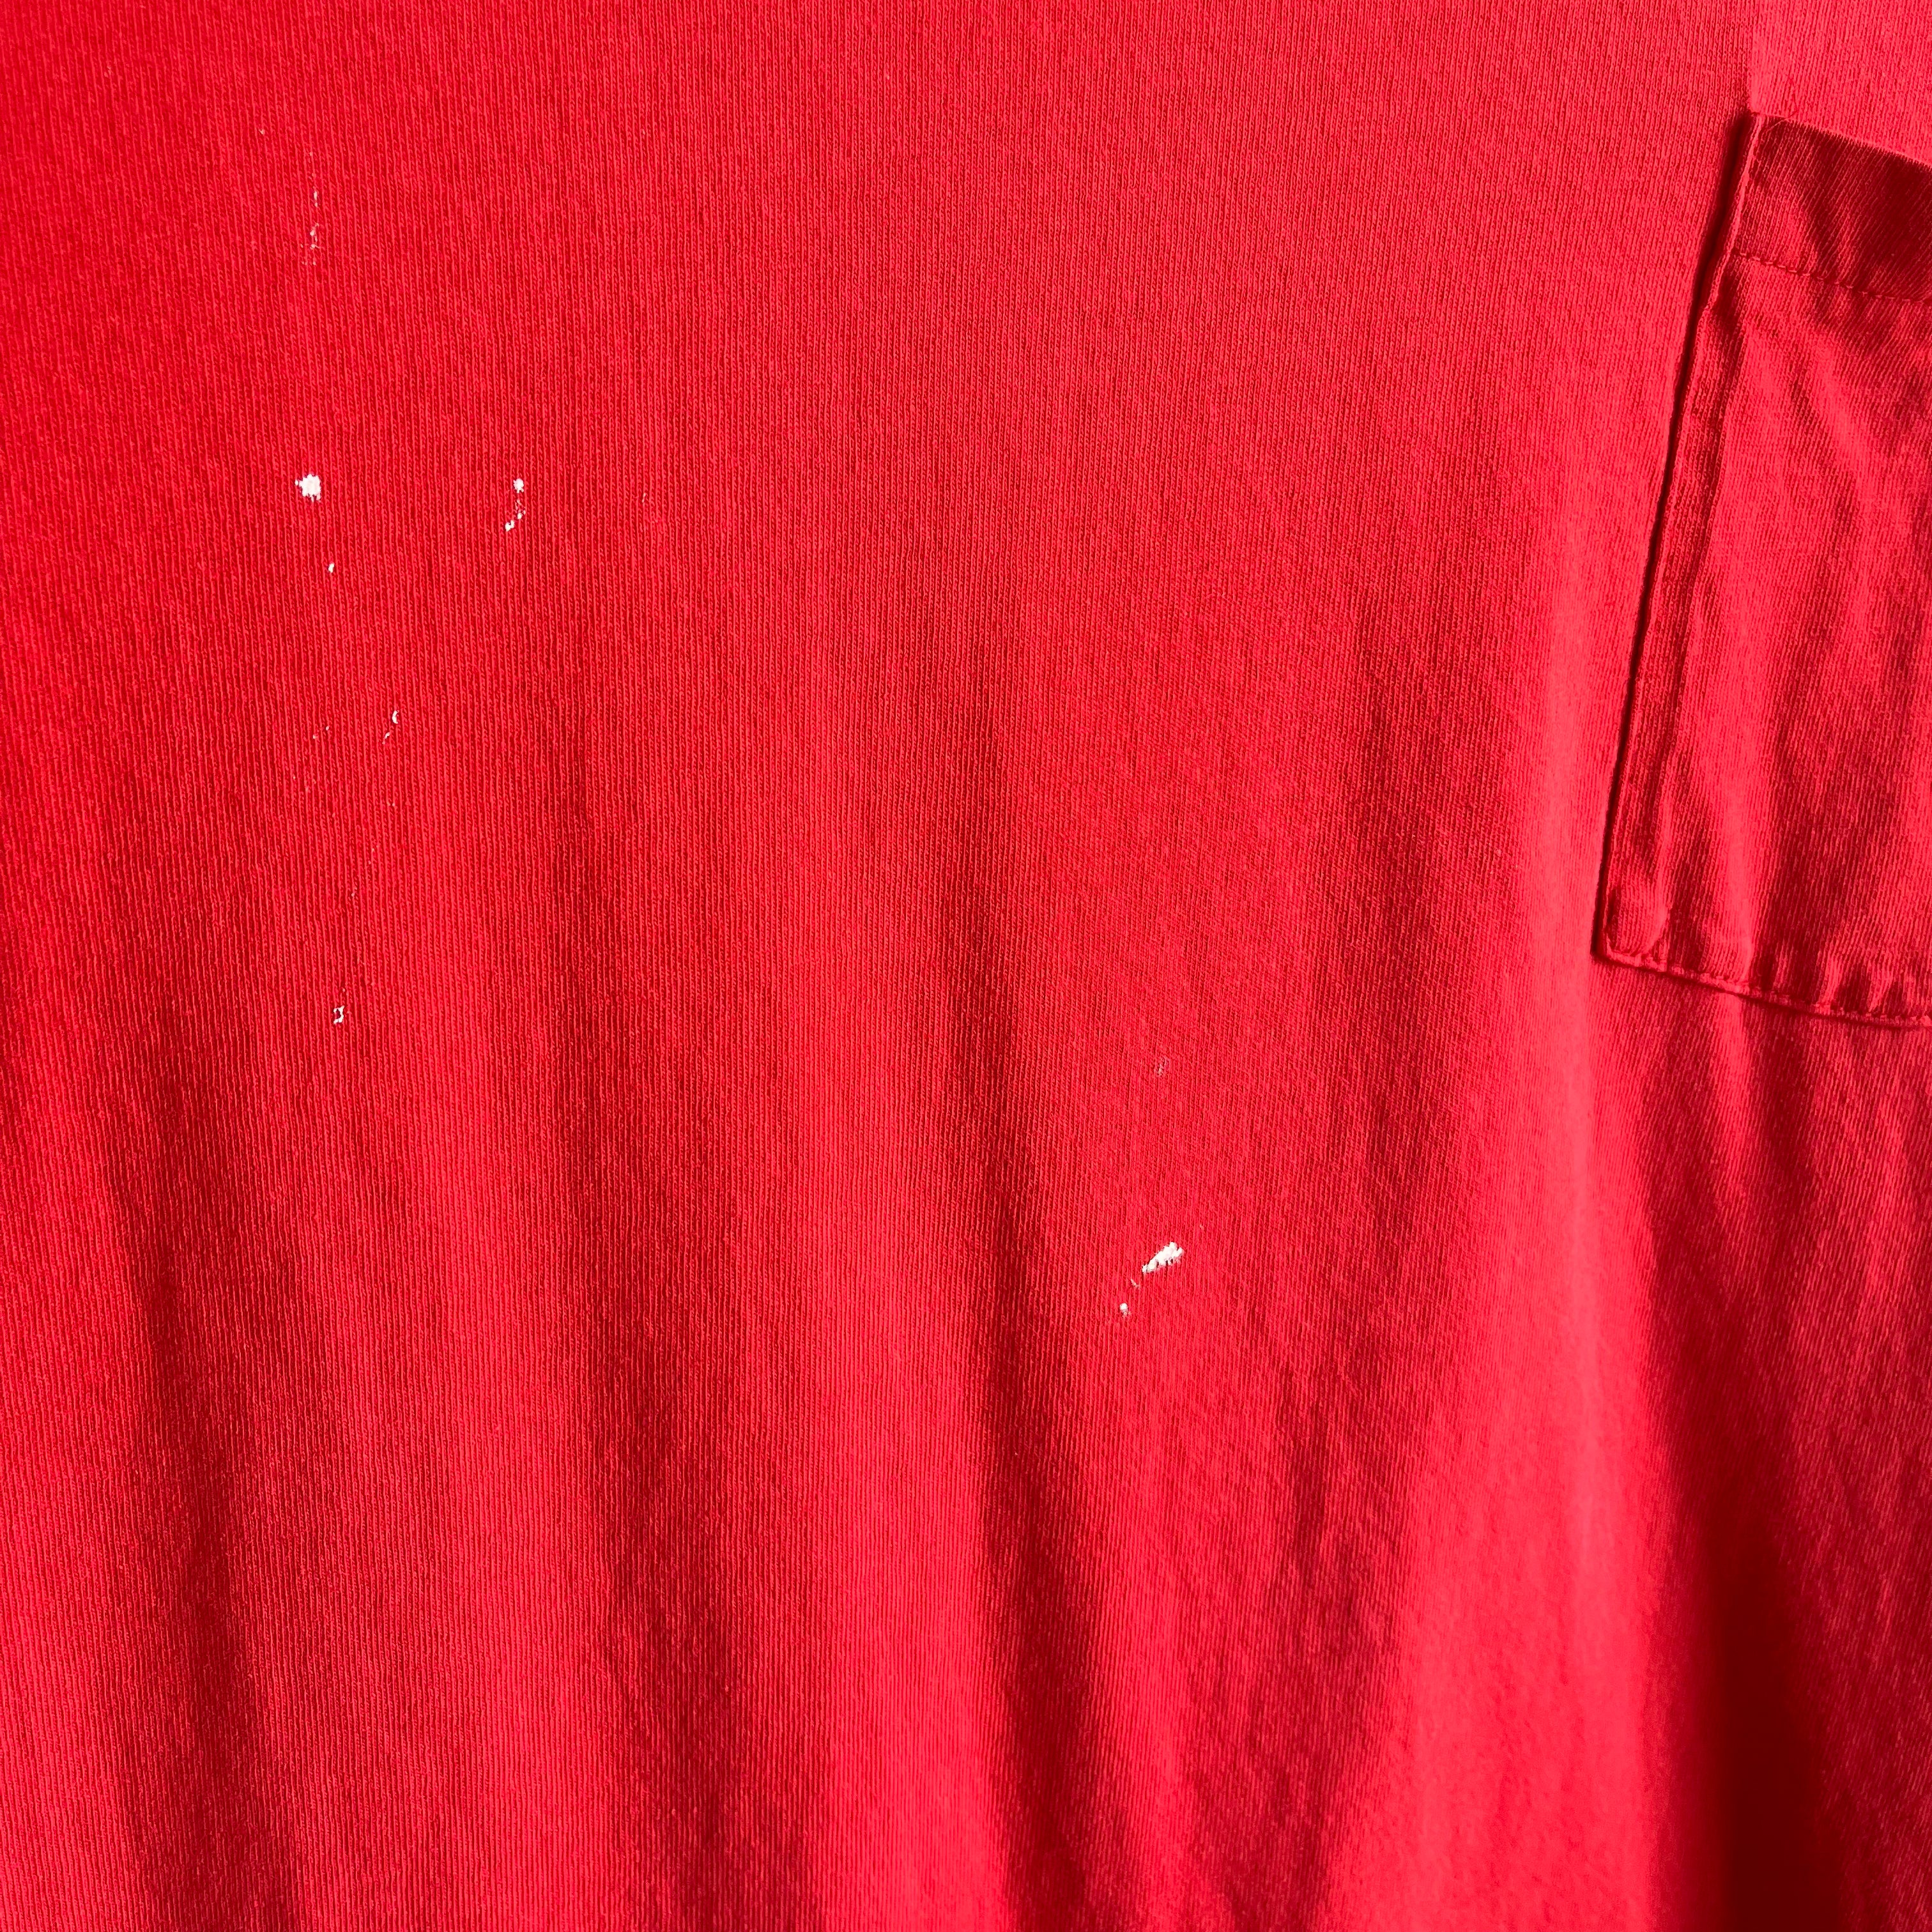 1990s Relaxed Fit Paint Stained Red Pocket T-Shirt